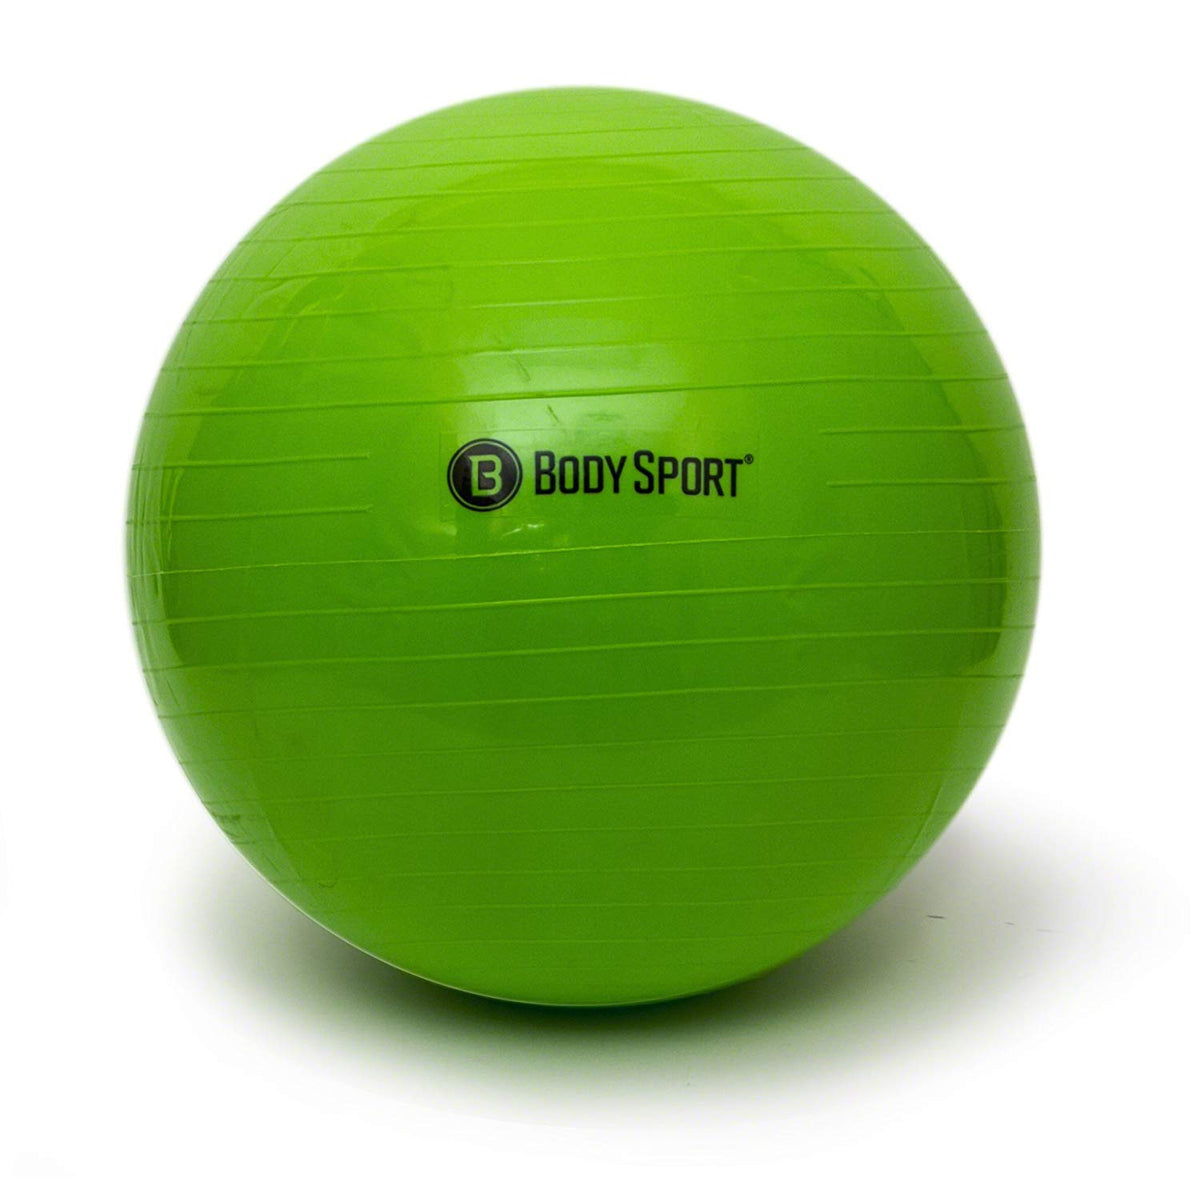  Athletic Works Exercise/Fitness/Work Out Ball 65 cm with Pump  Anti Burst Mint Green : Sports & Outdoors